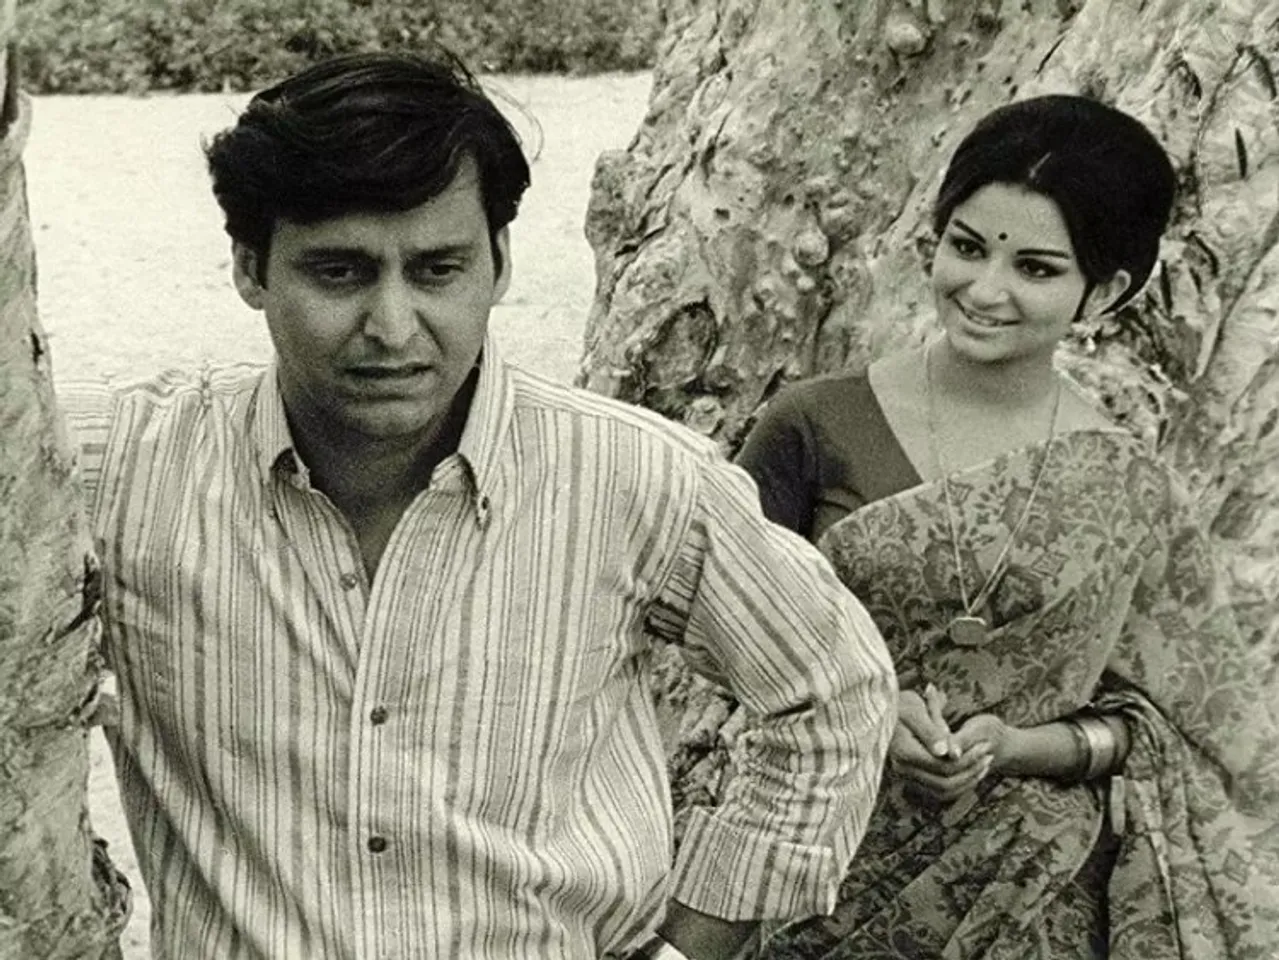 Sunil Gangopadhyay's classic 'Aranyer Dinratri starring Soumitra Chatterjee and Sharmila Tagore